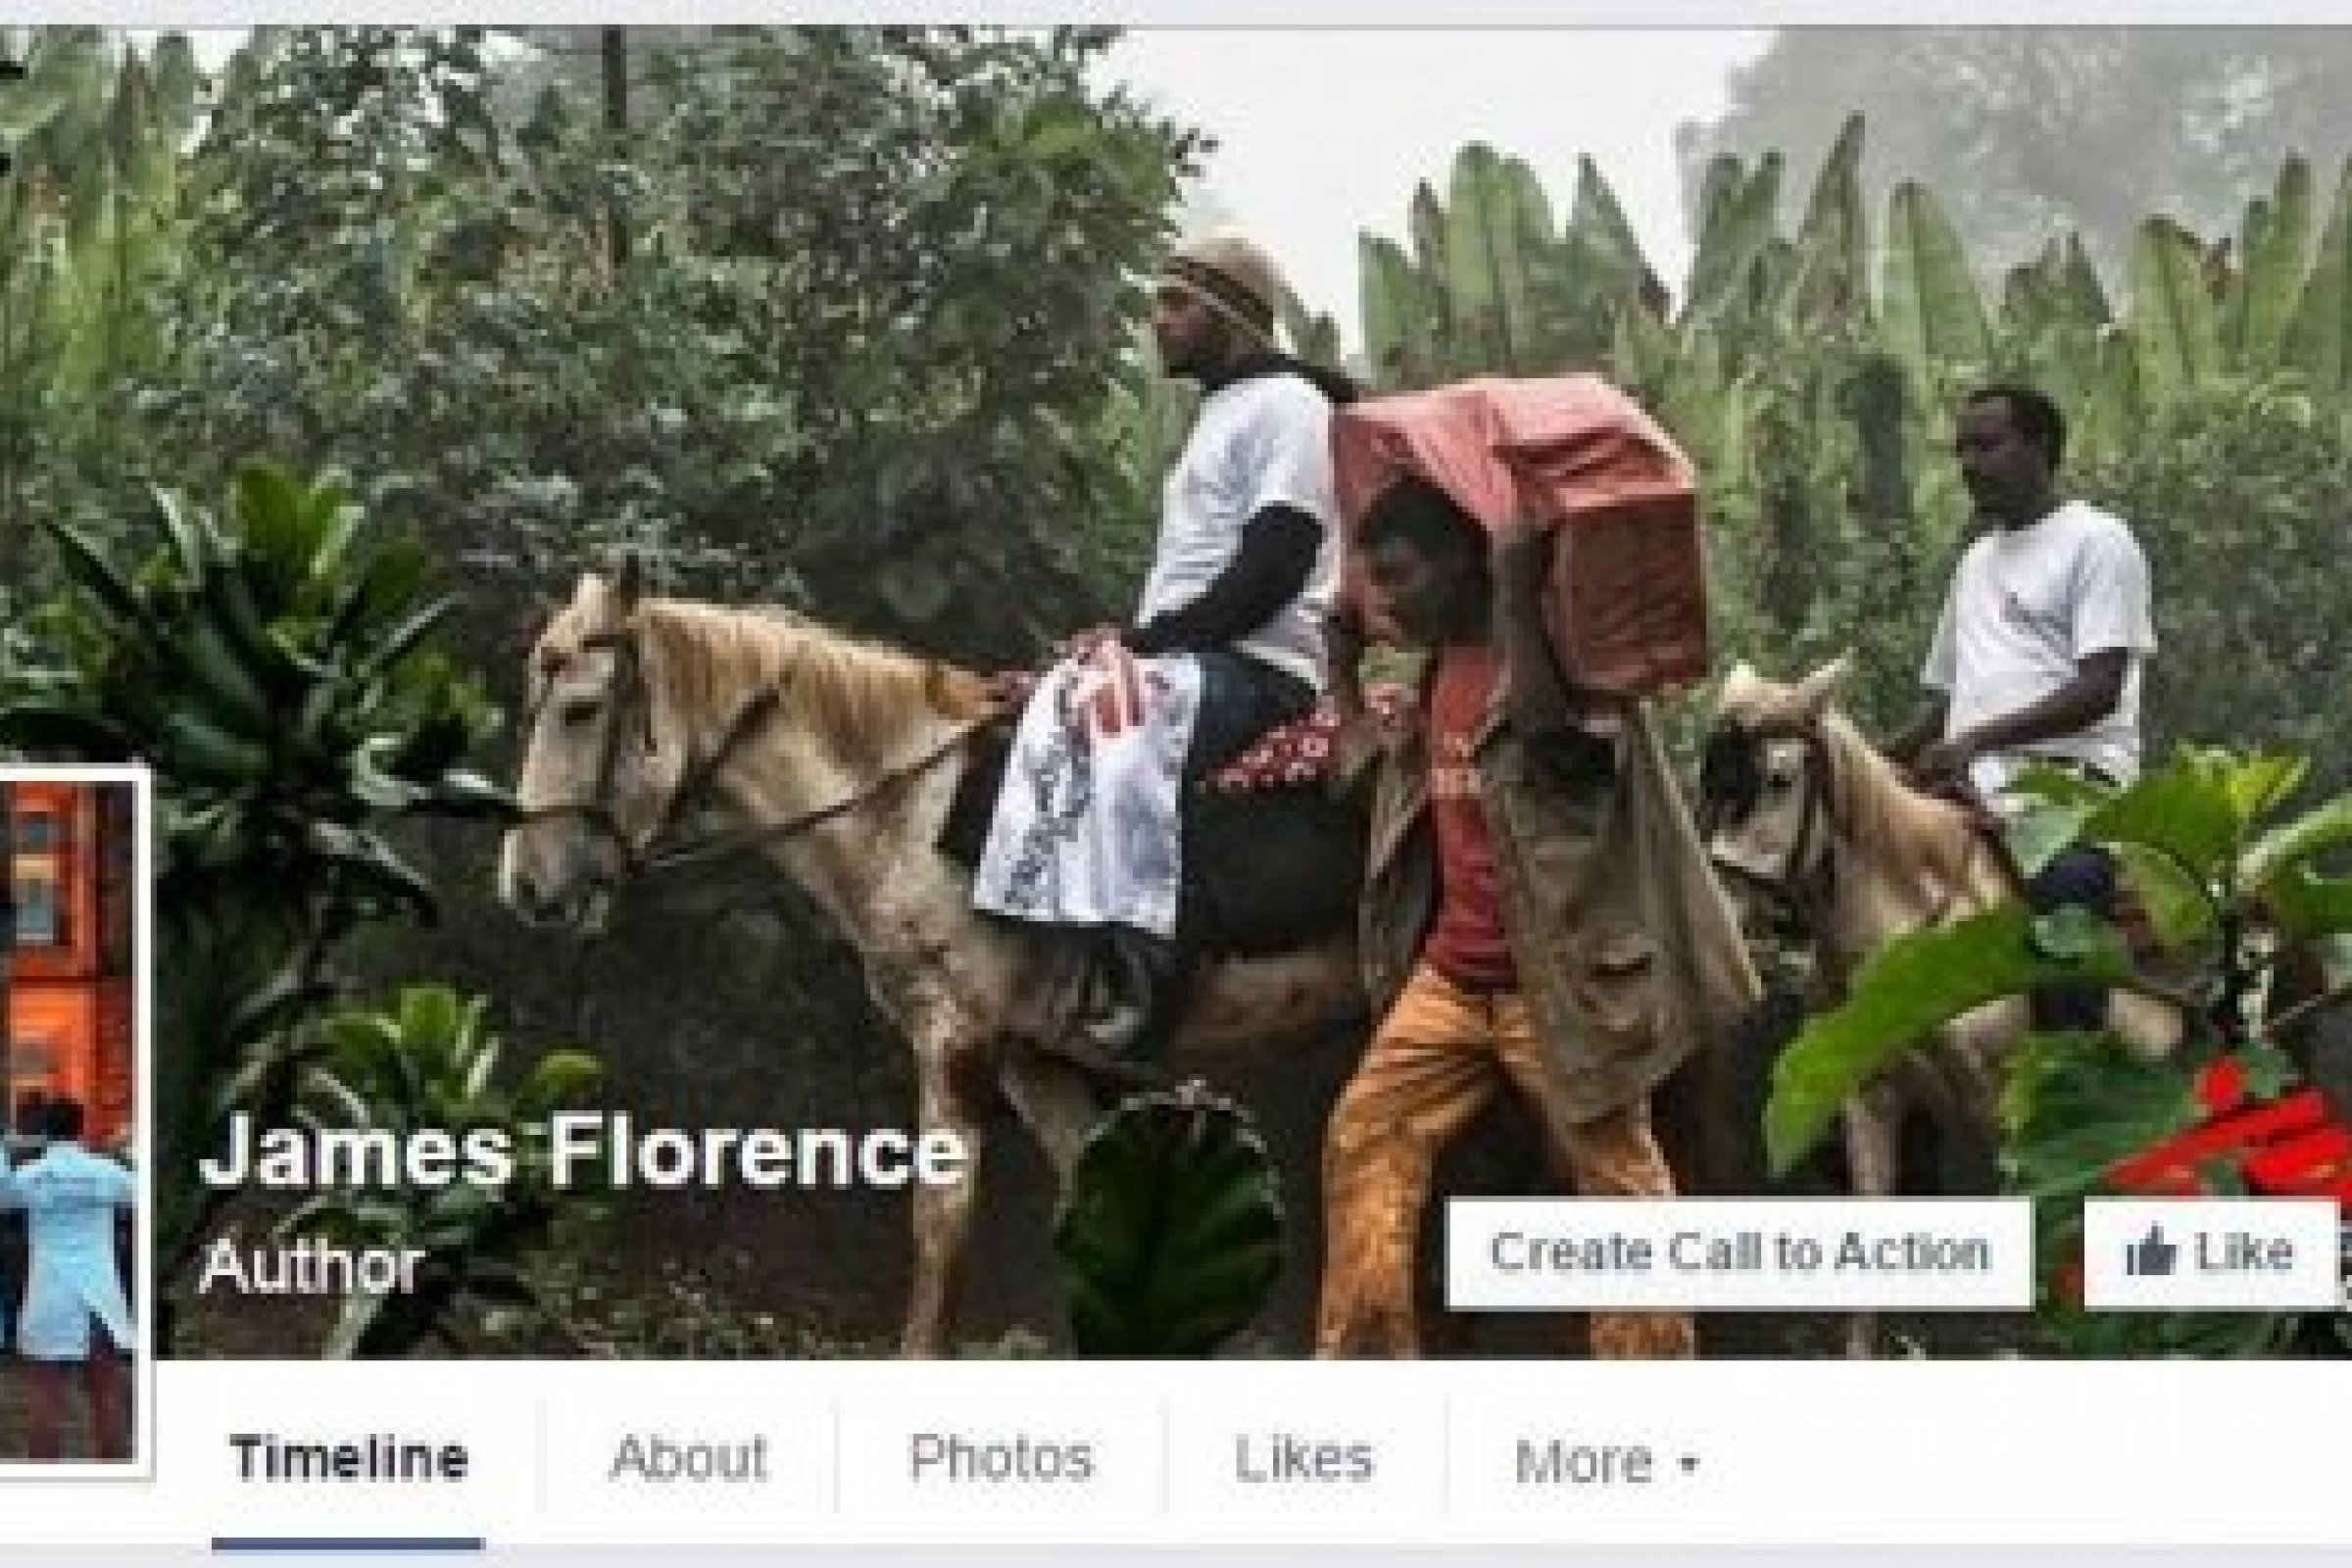 An example of an MSF Facebook banner